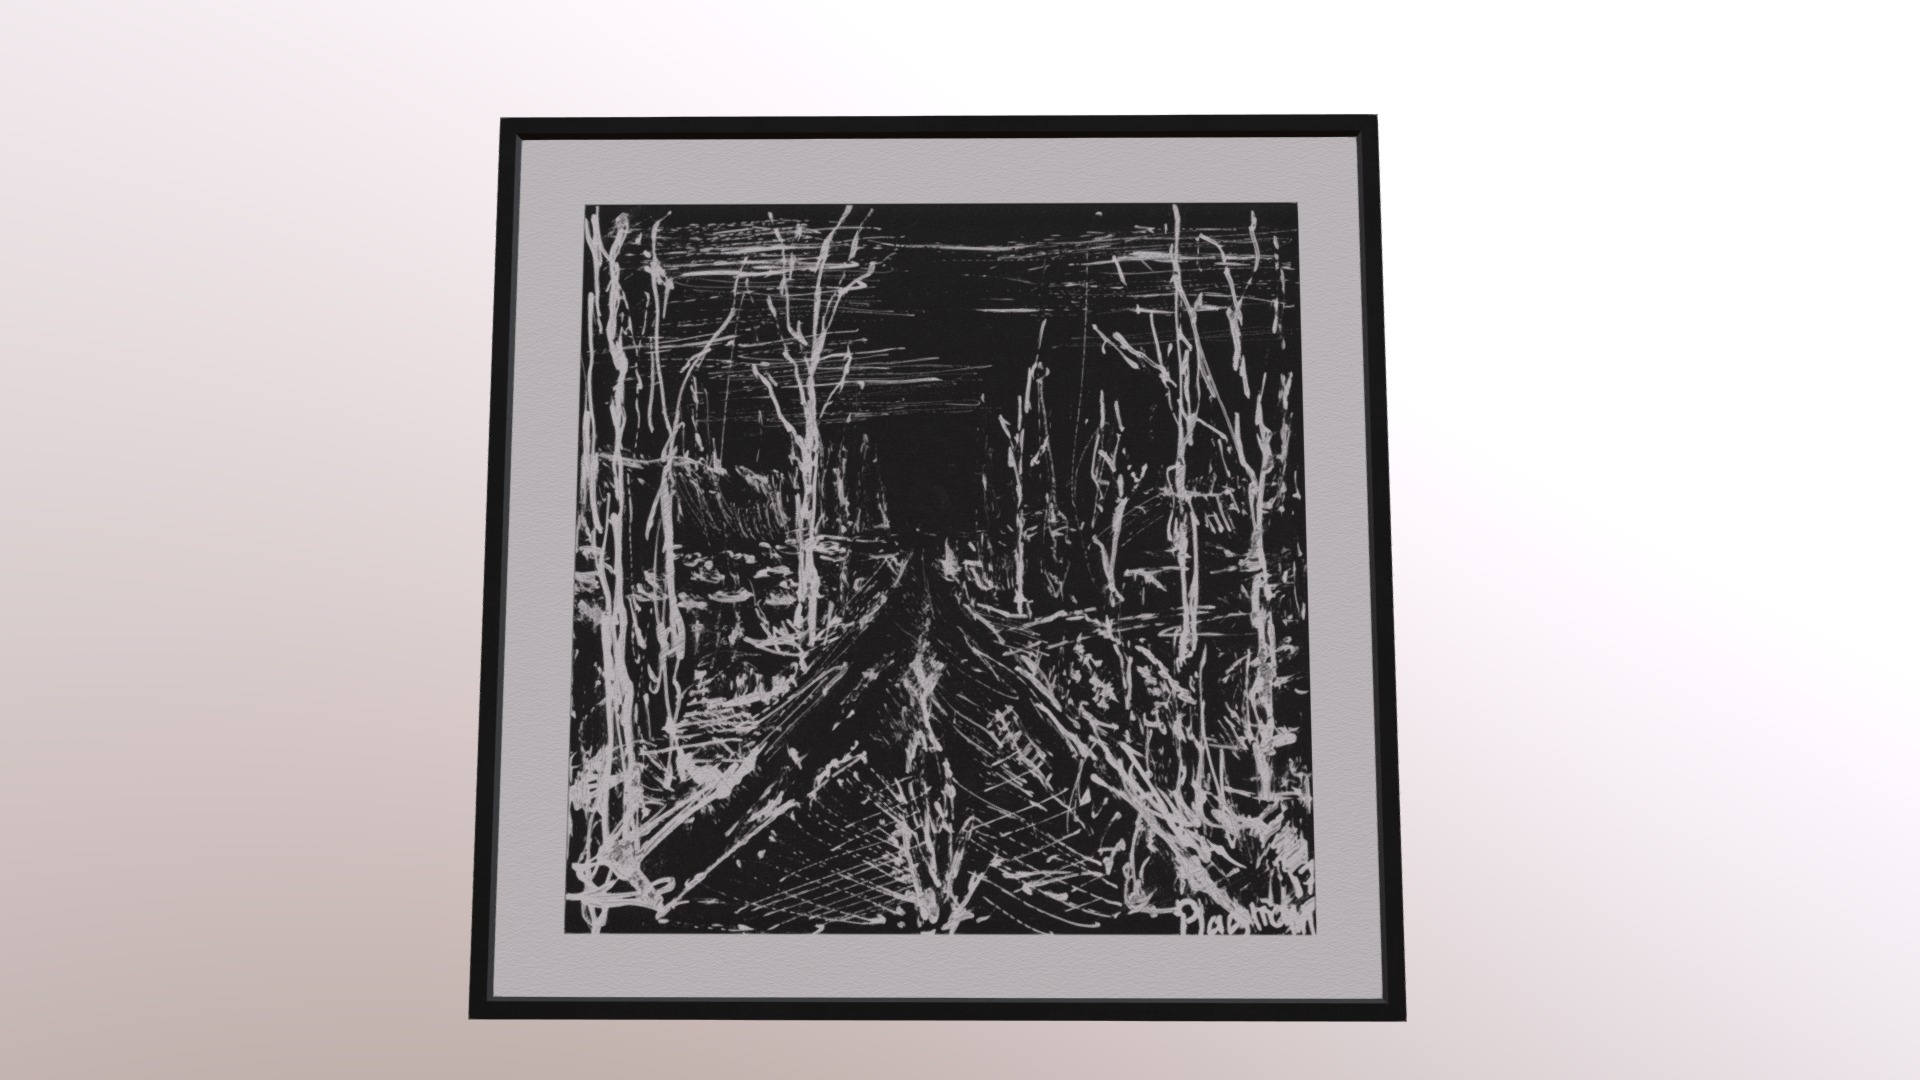 3D model Picture Frame – Untitled #path - This is a 3D model of the Picture Frame - Untitled #path. The 3D model is about a black and white photo of a tree.